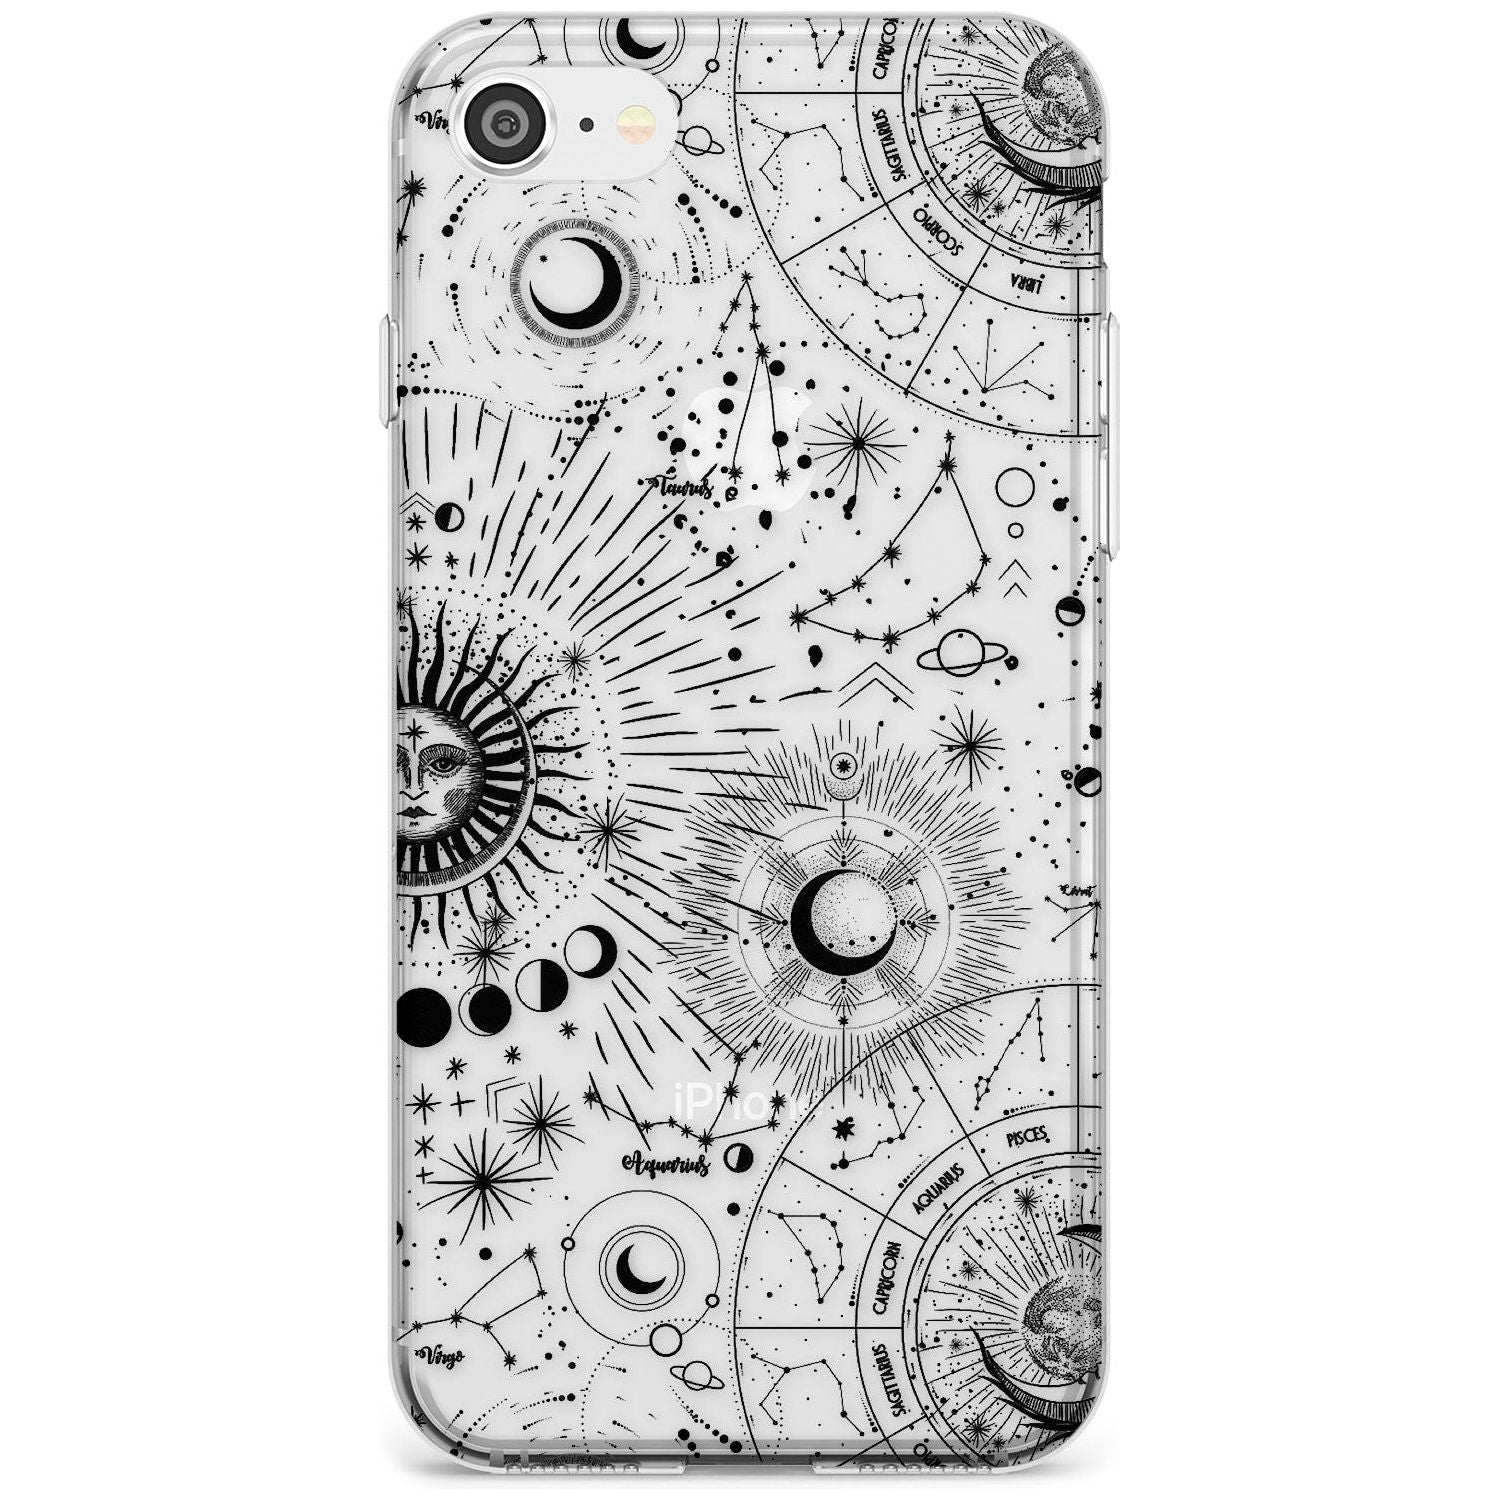 Suns & Constellations Astrological Slim TPU Phone Case for iPhone SE 8 7 Plus